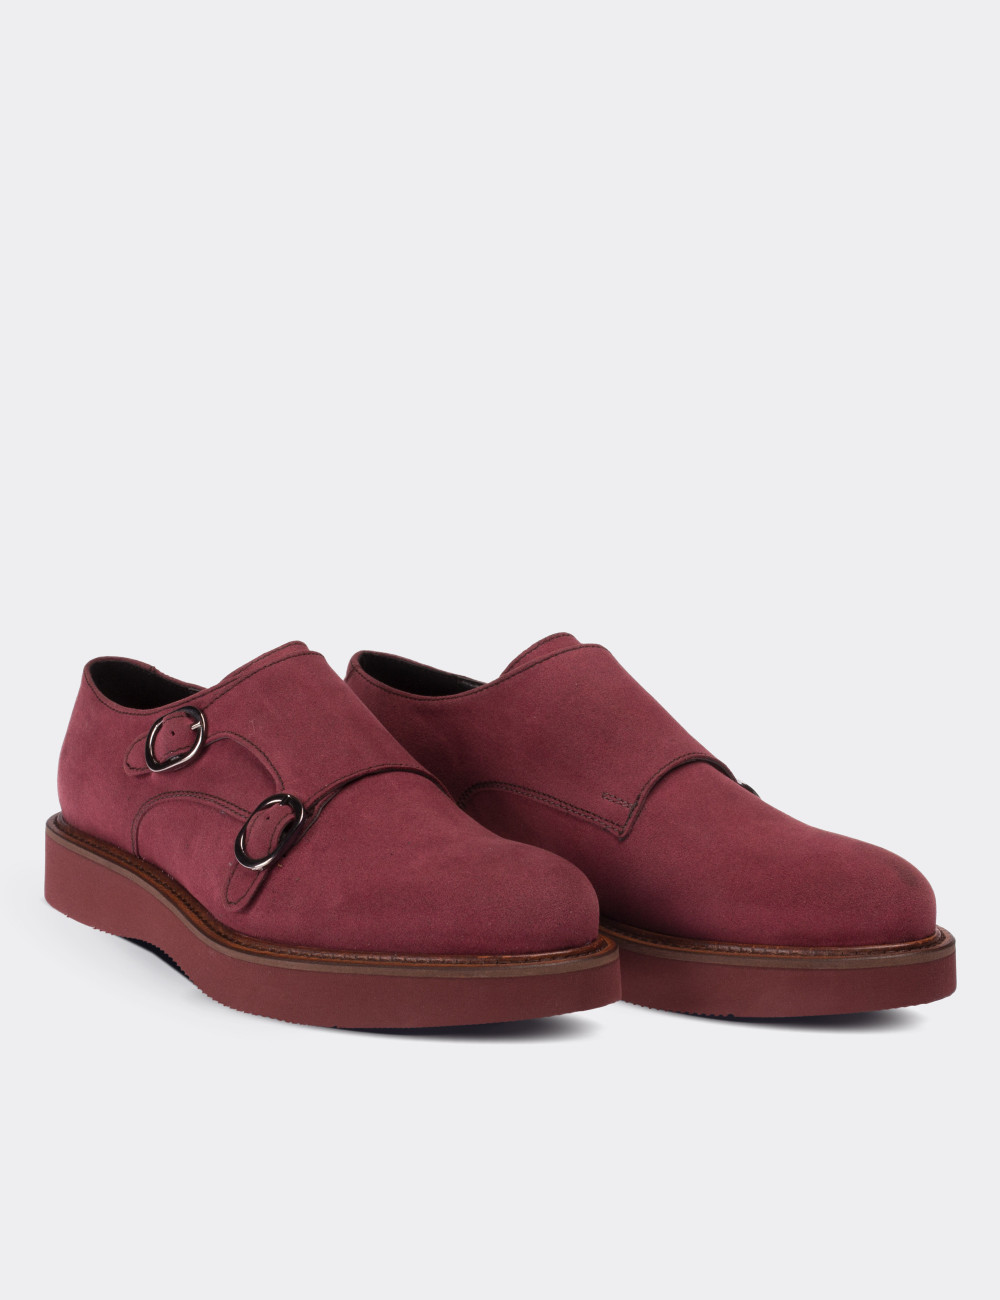 Pink Suede Leather Monk Straps - 01614ZPMBE01